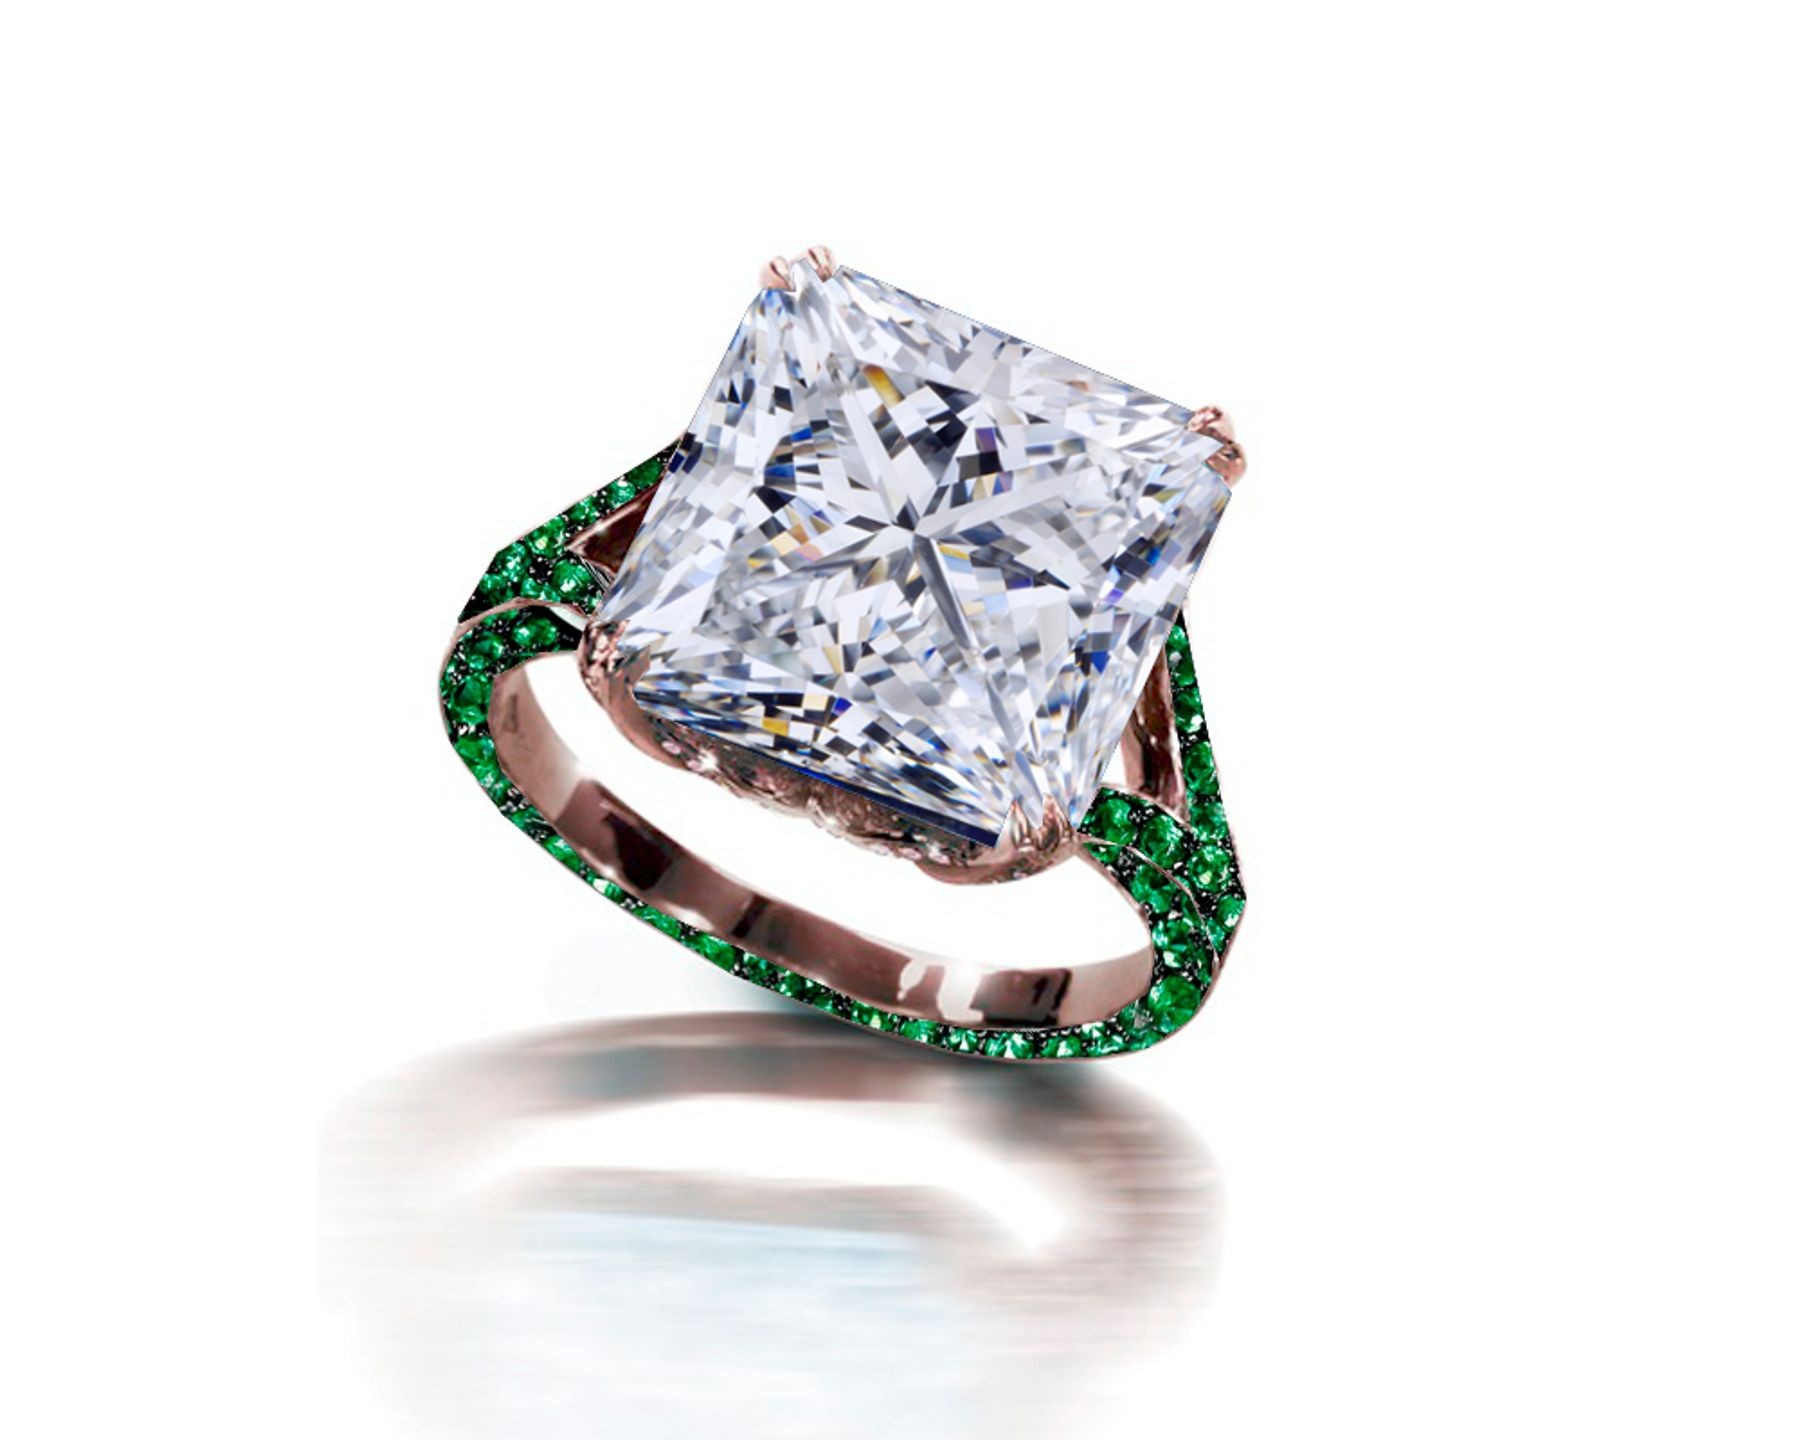 Ring with Square Diamond & Pave Set Emeralds & White Diamonds in Gold or Platinum